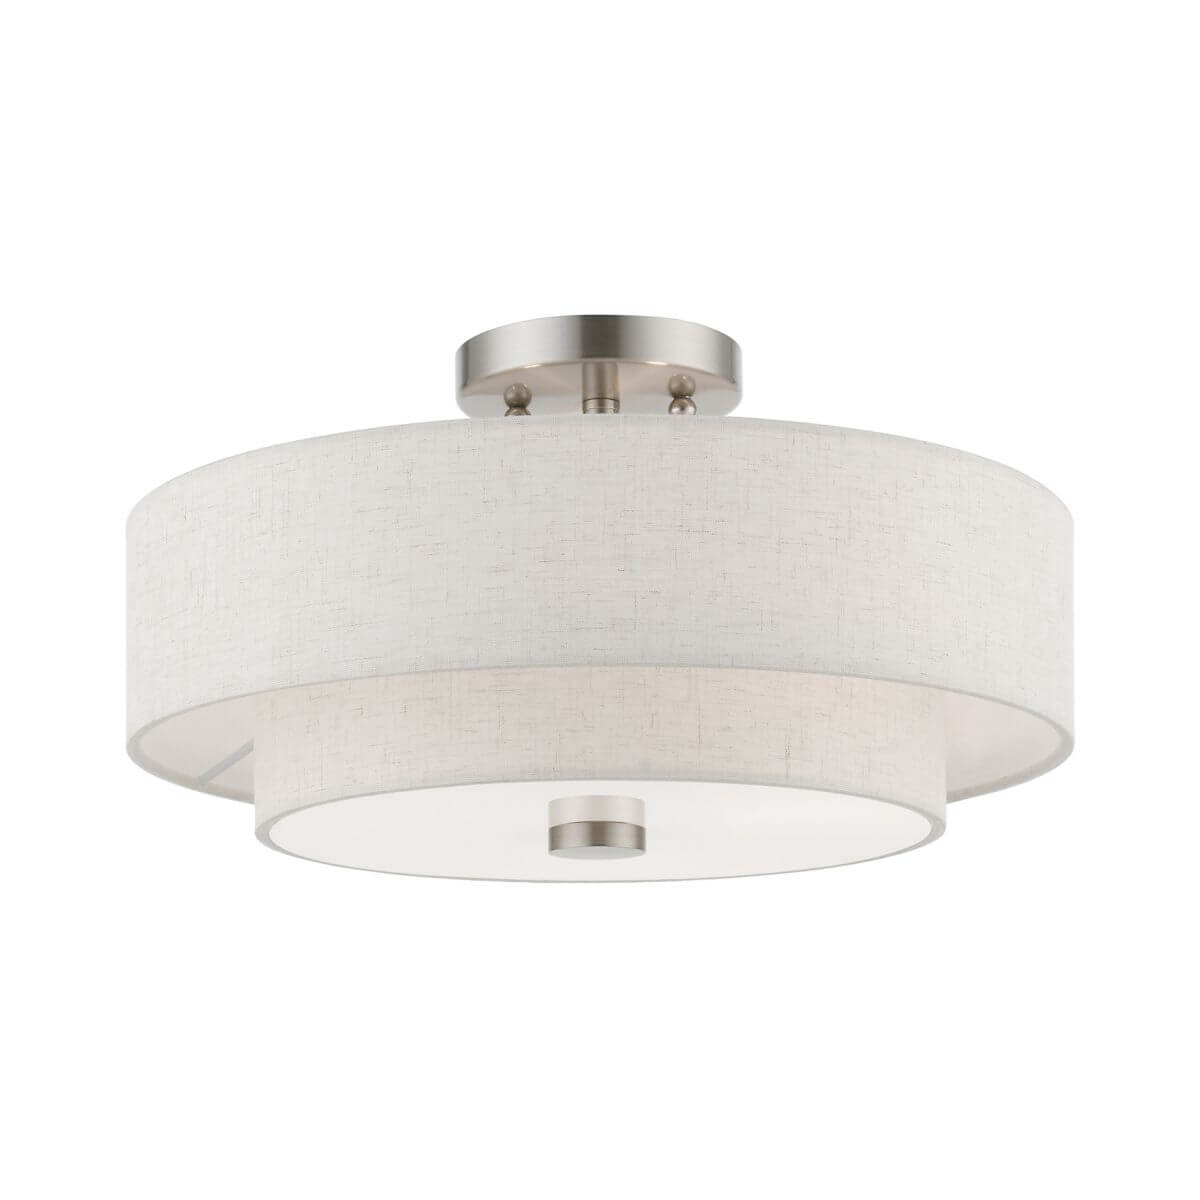 Livex 51084-91 Meridian 3 Light 15 inch Semi-Flush Mount in Brushed Nickel with Hand Crafted Oatmeal Color Hardback Fabric Shade - White Fabric Inside